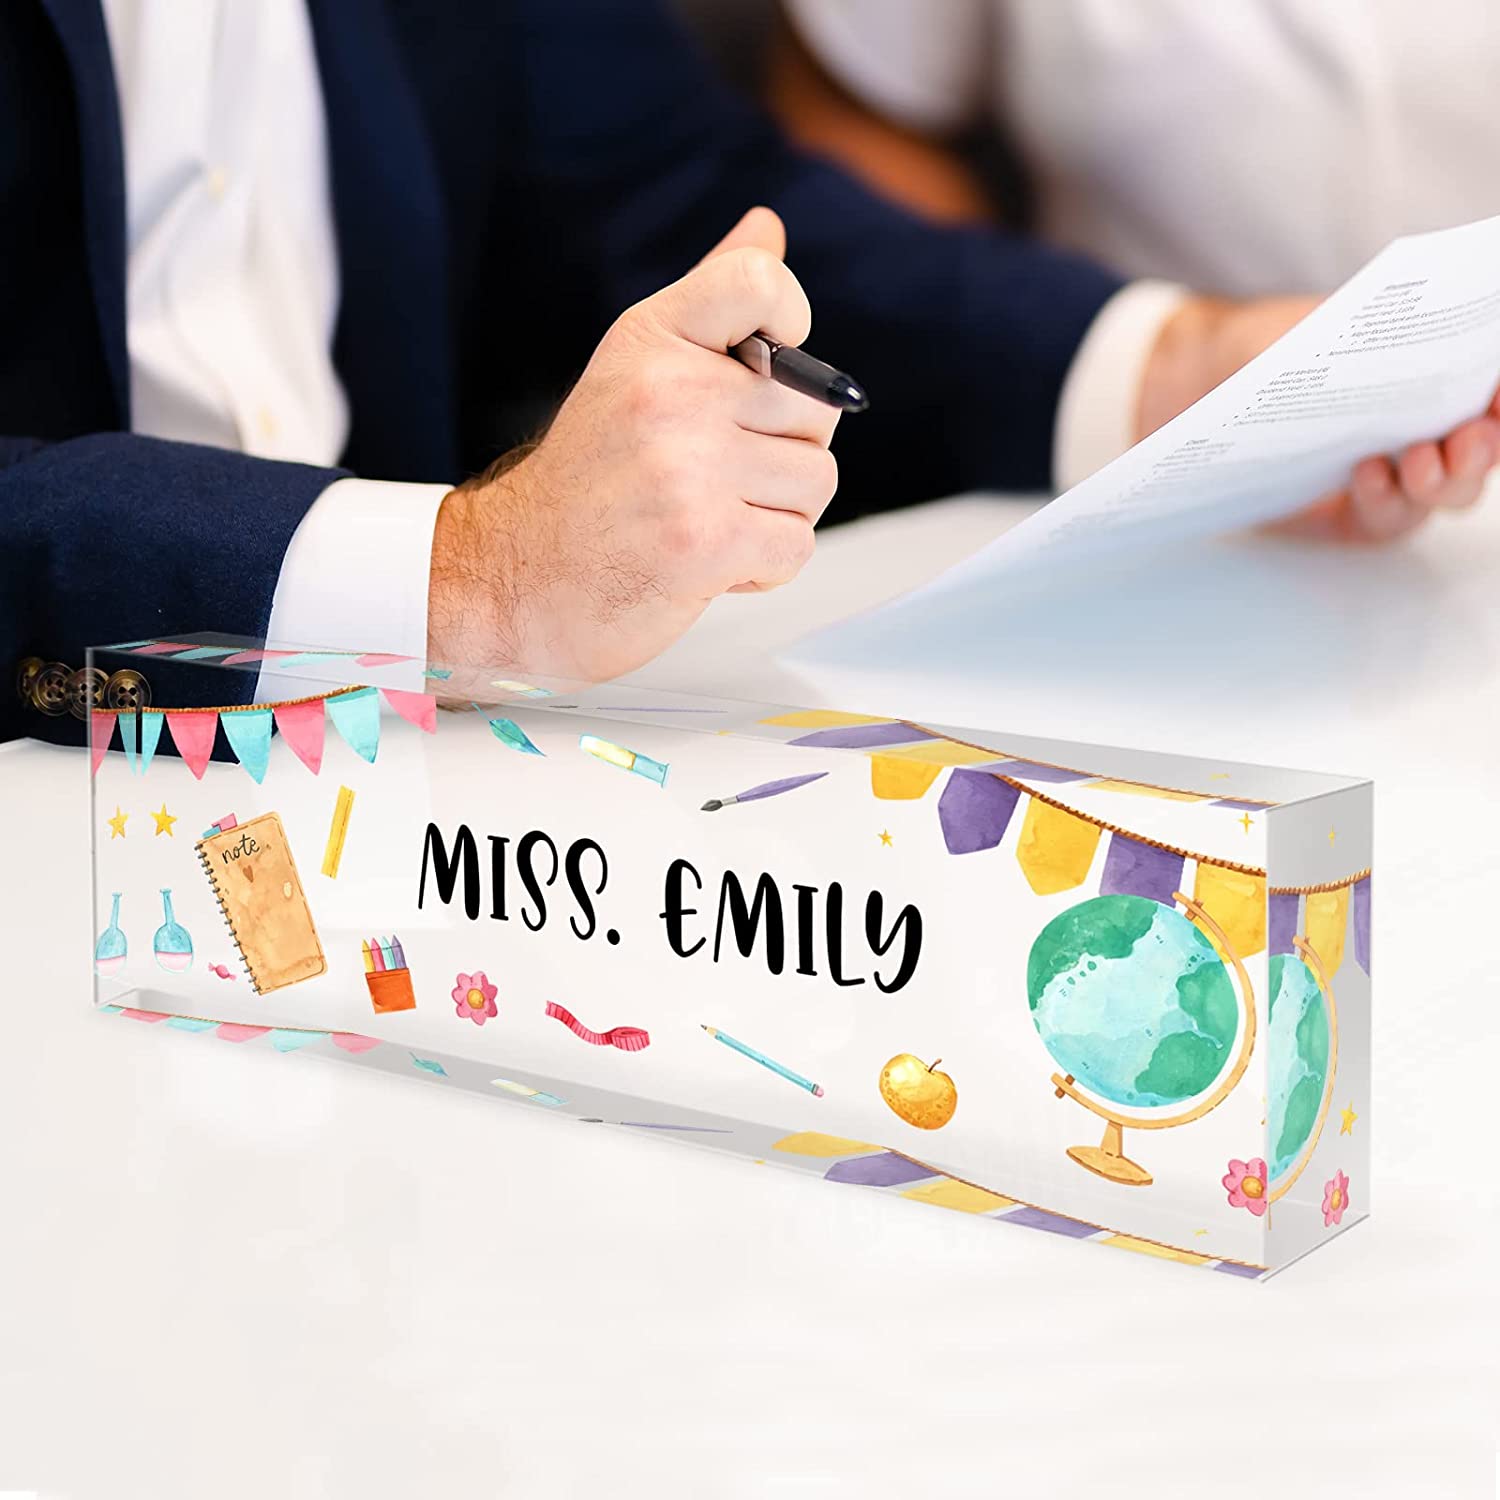 Personalized Office Gifts, Desk Accessories